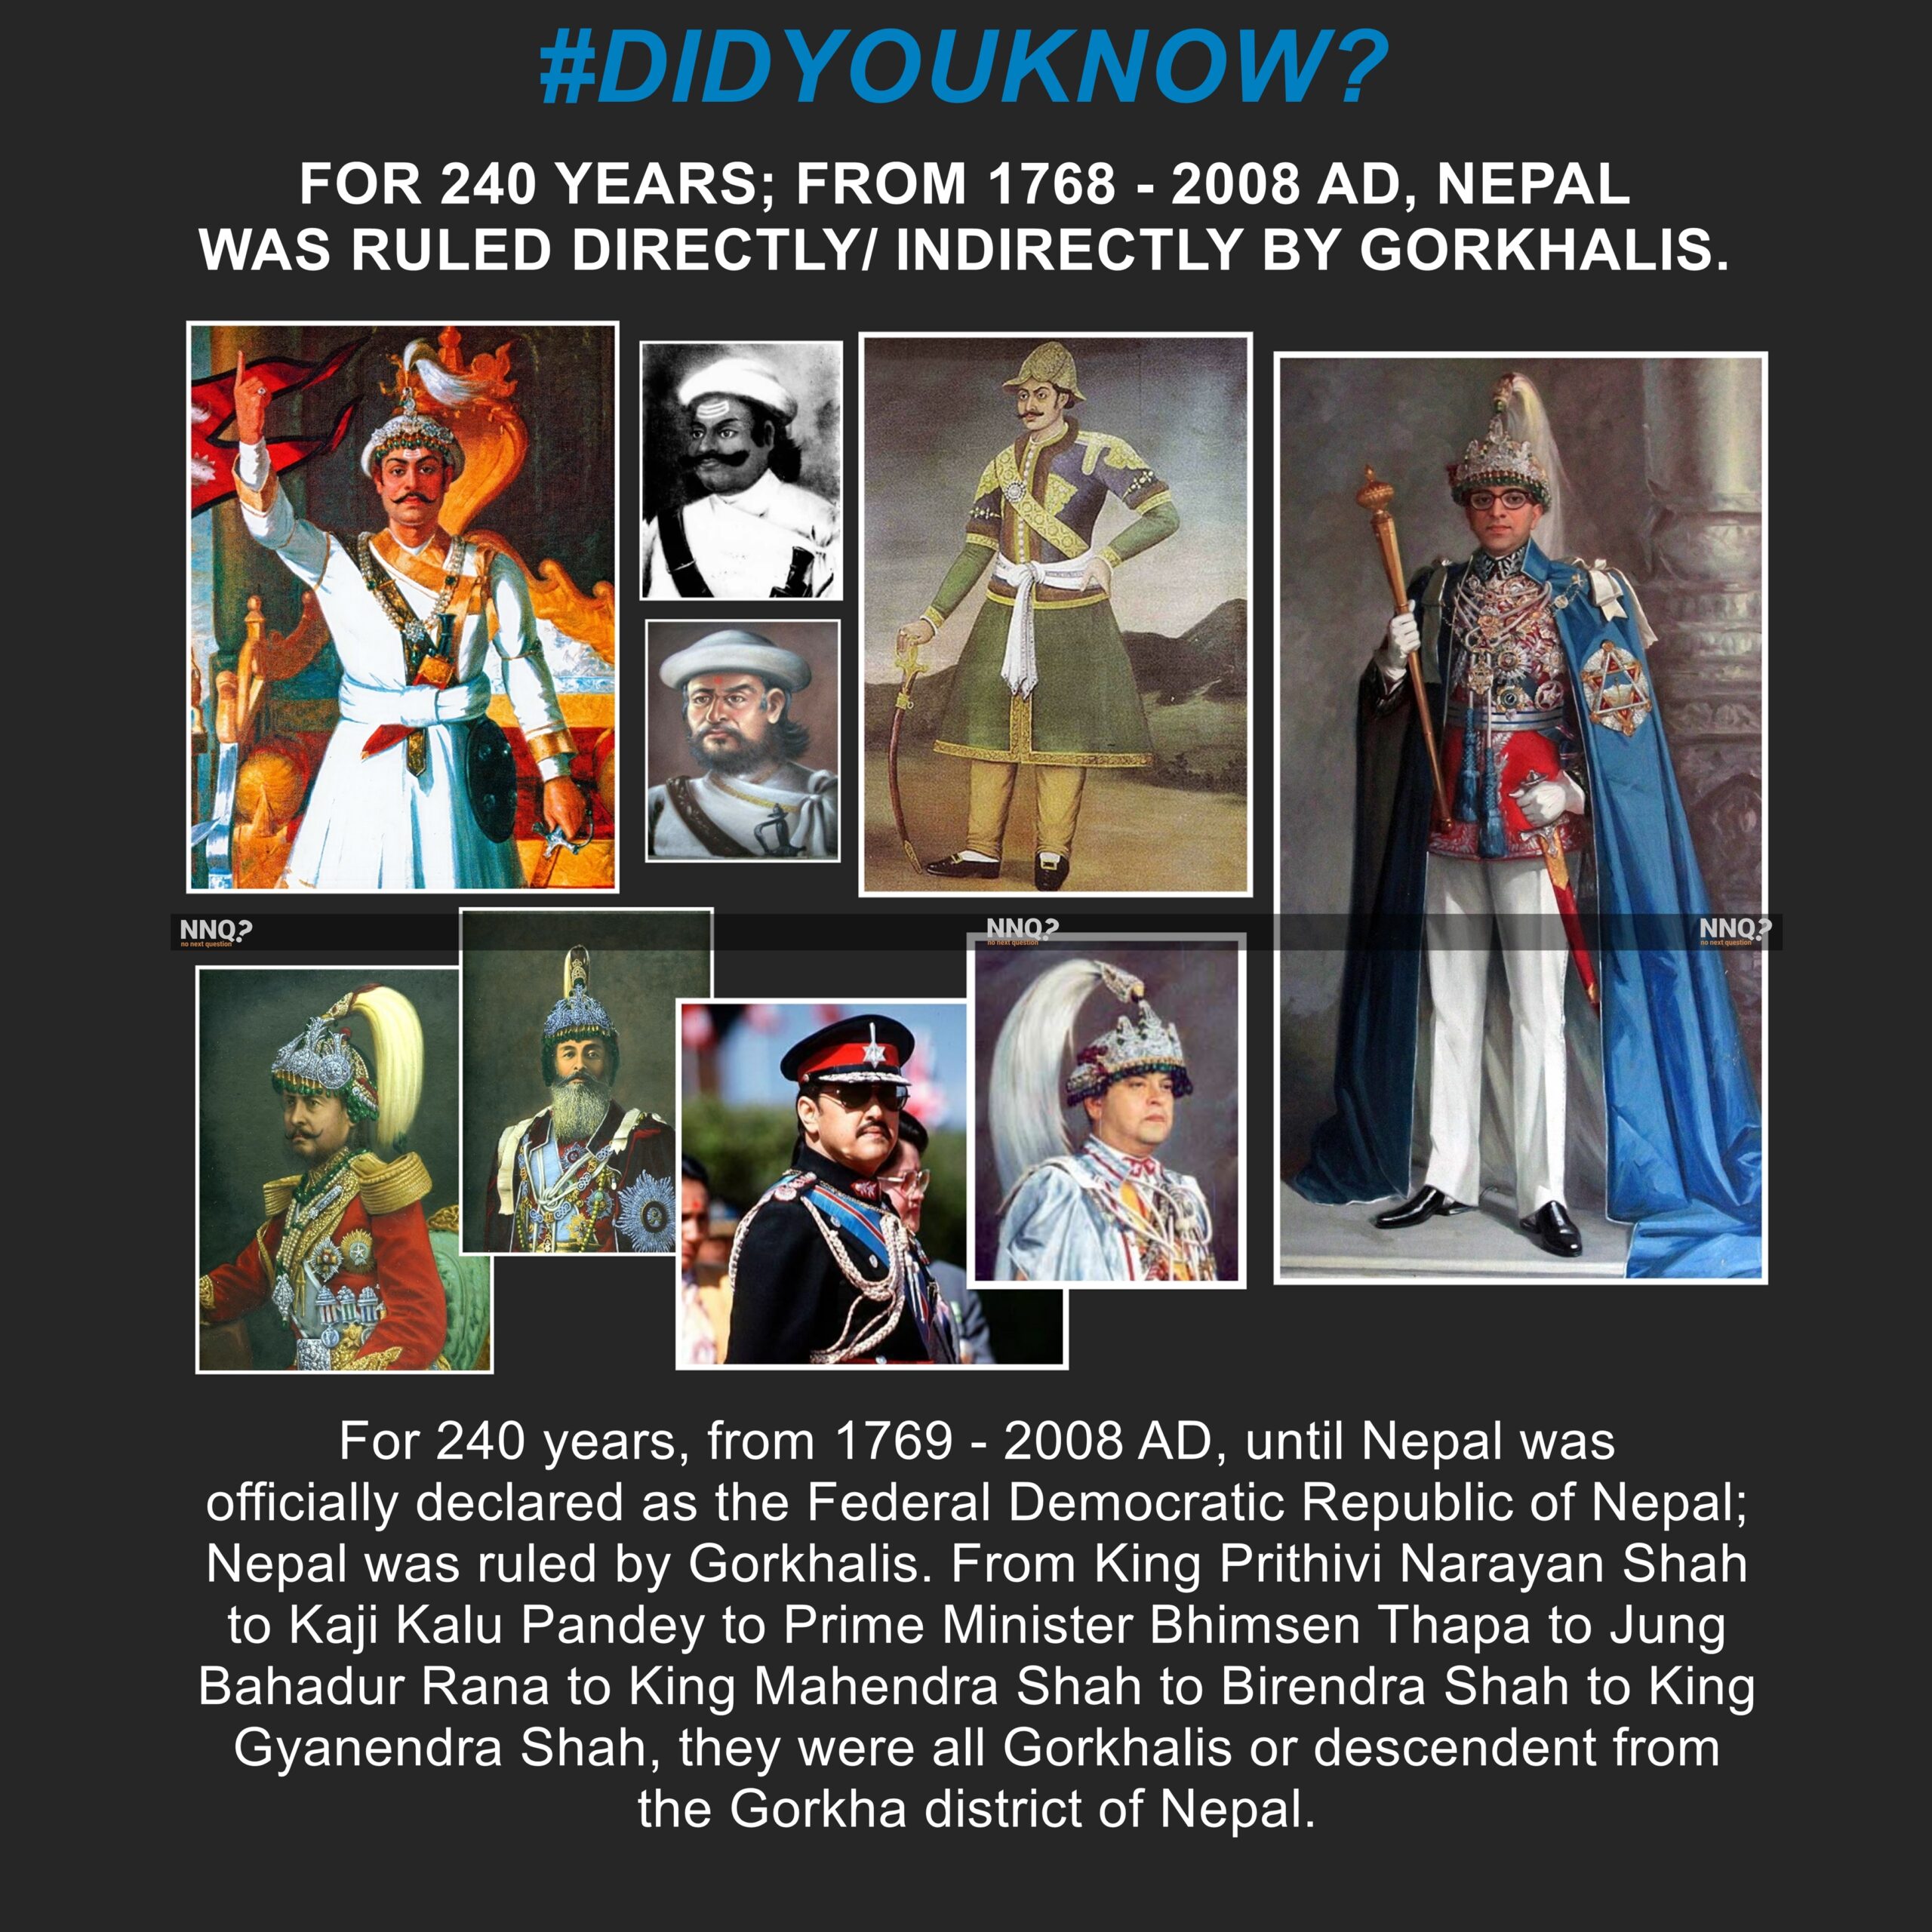 Did you know? Gorkhalis ruled Nepal for 240 years, from 1768 – 2008 AD.